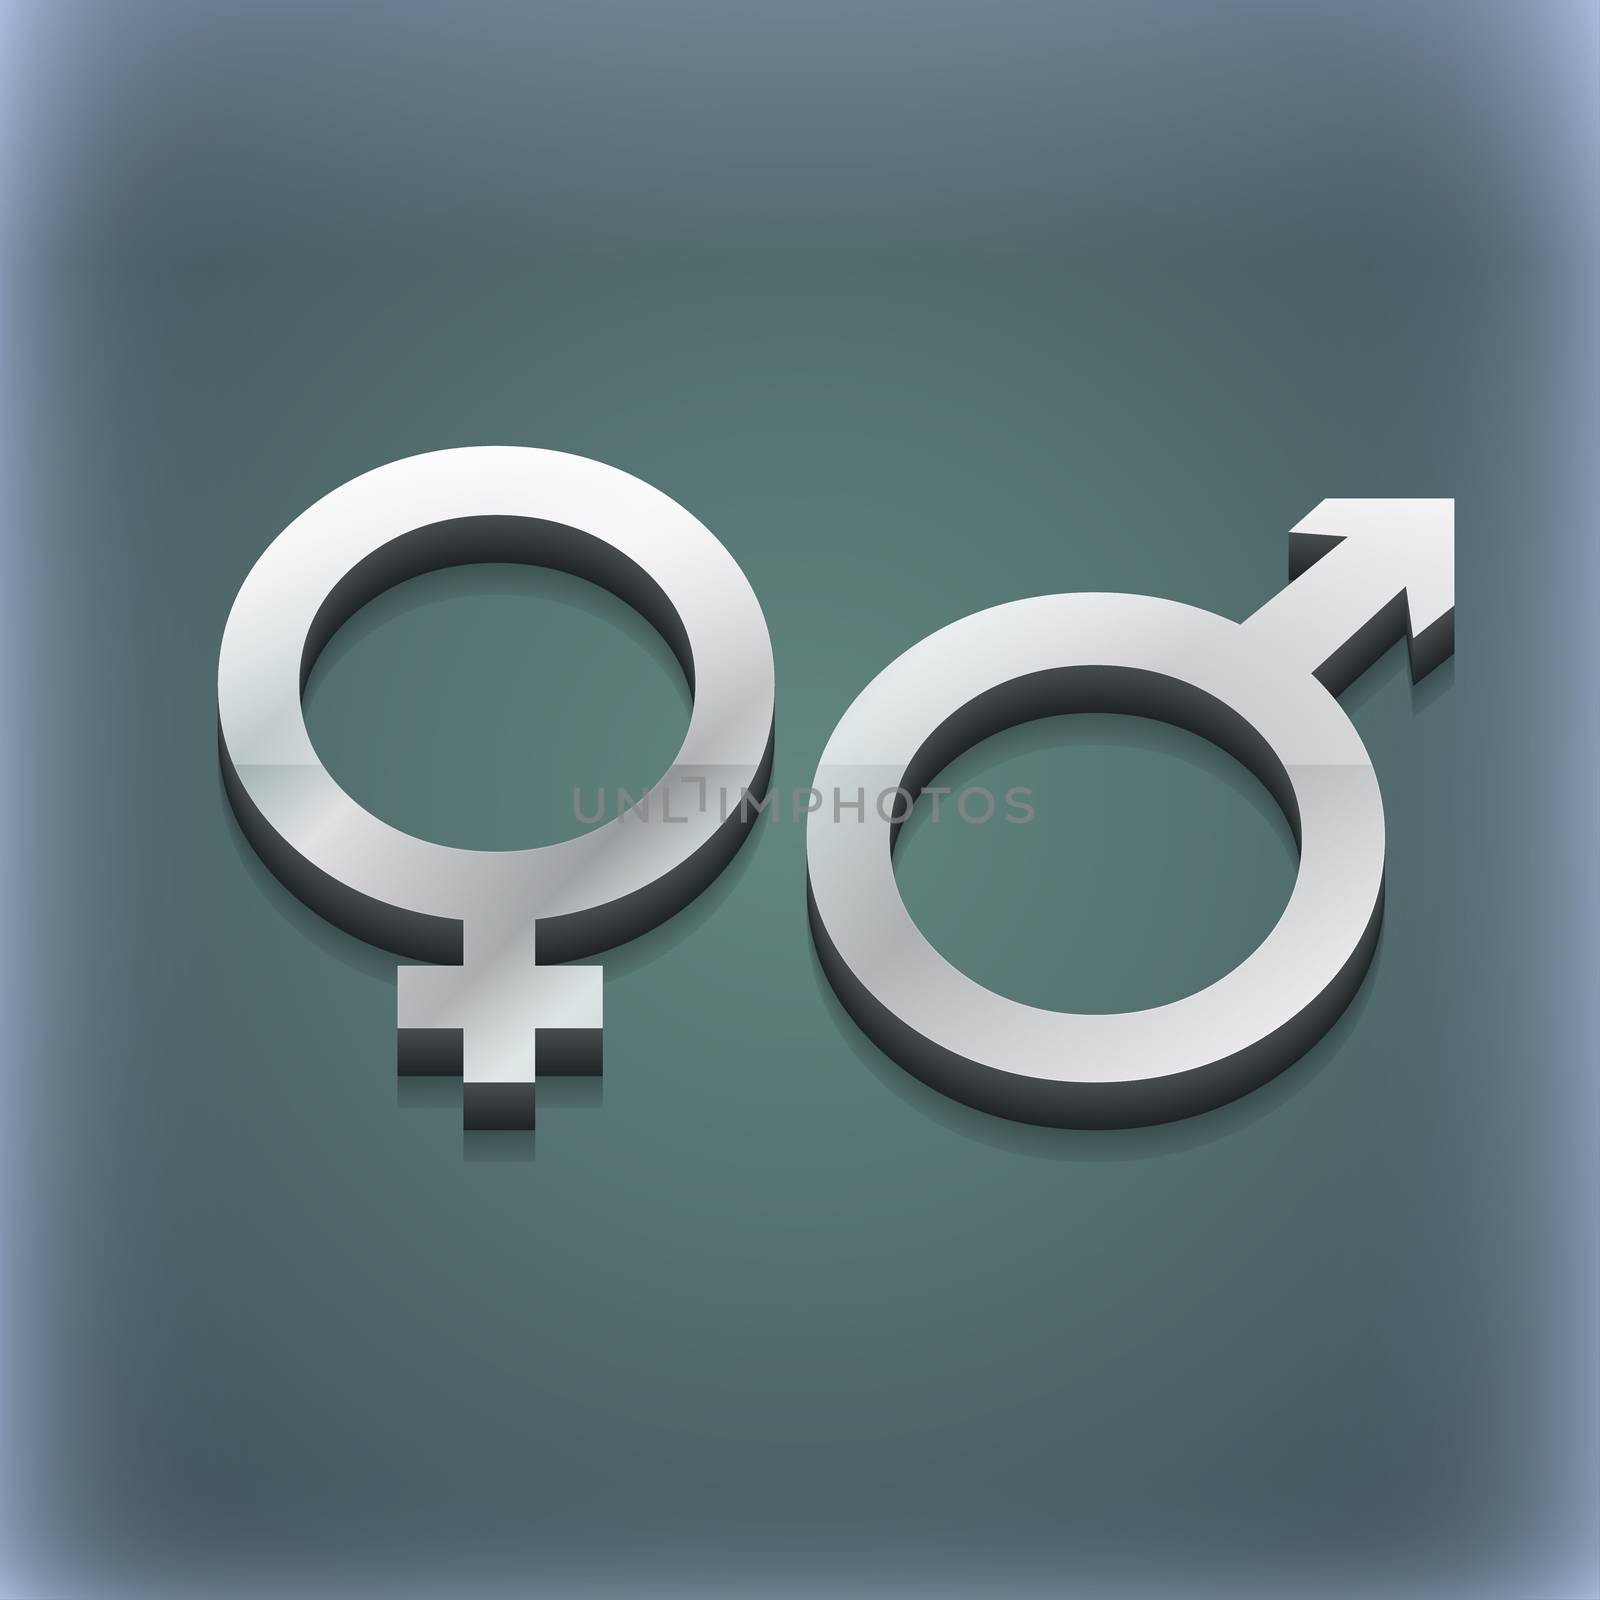 male and female icon symbol. 3D style. Trendy, modern design with space for your text illustration. Raster version